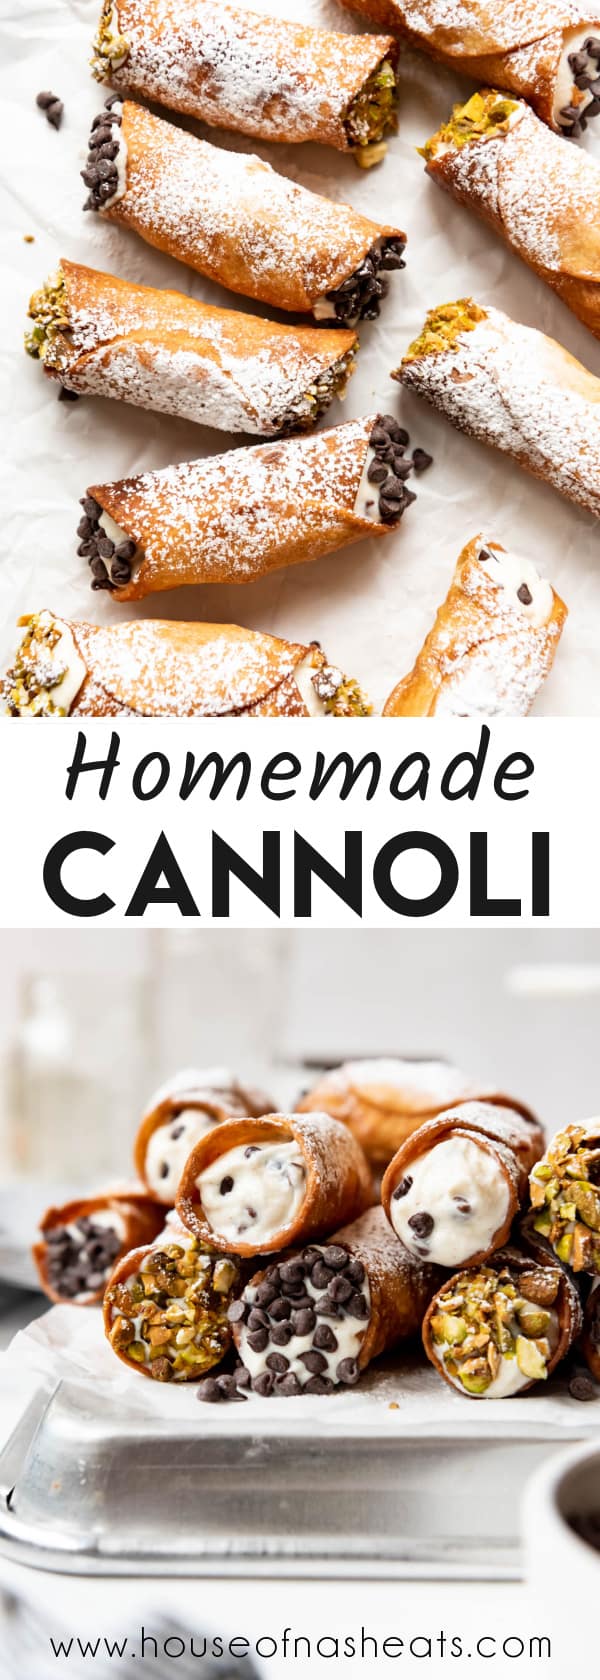 A collage of images of homemade cannoli with text overlay.